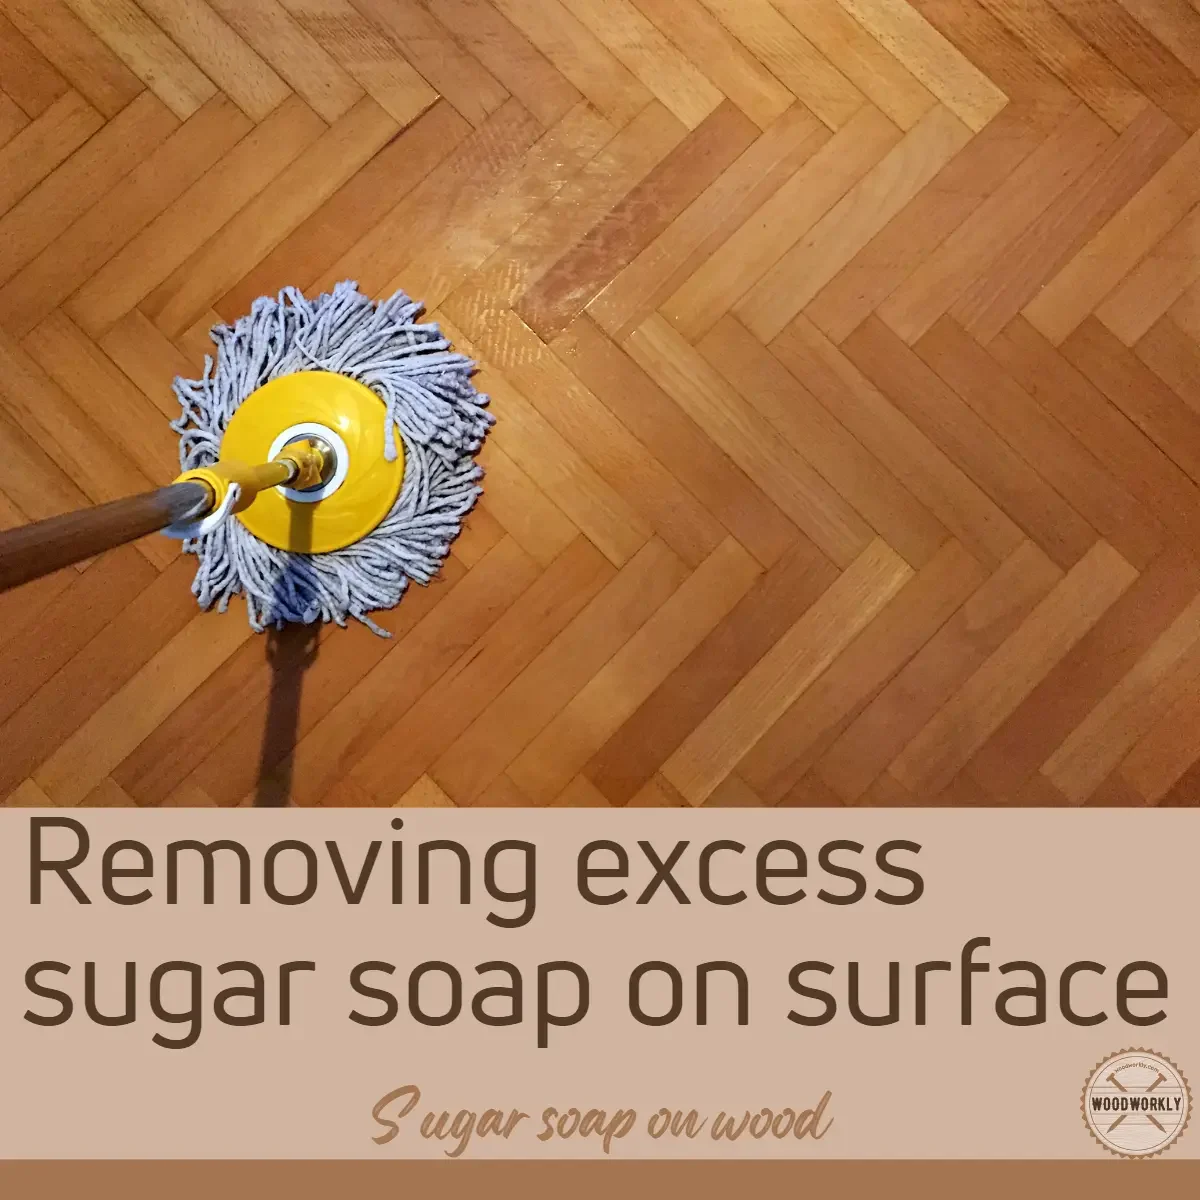 Removing excess sugar soap on surface